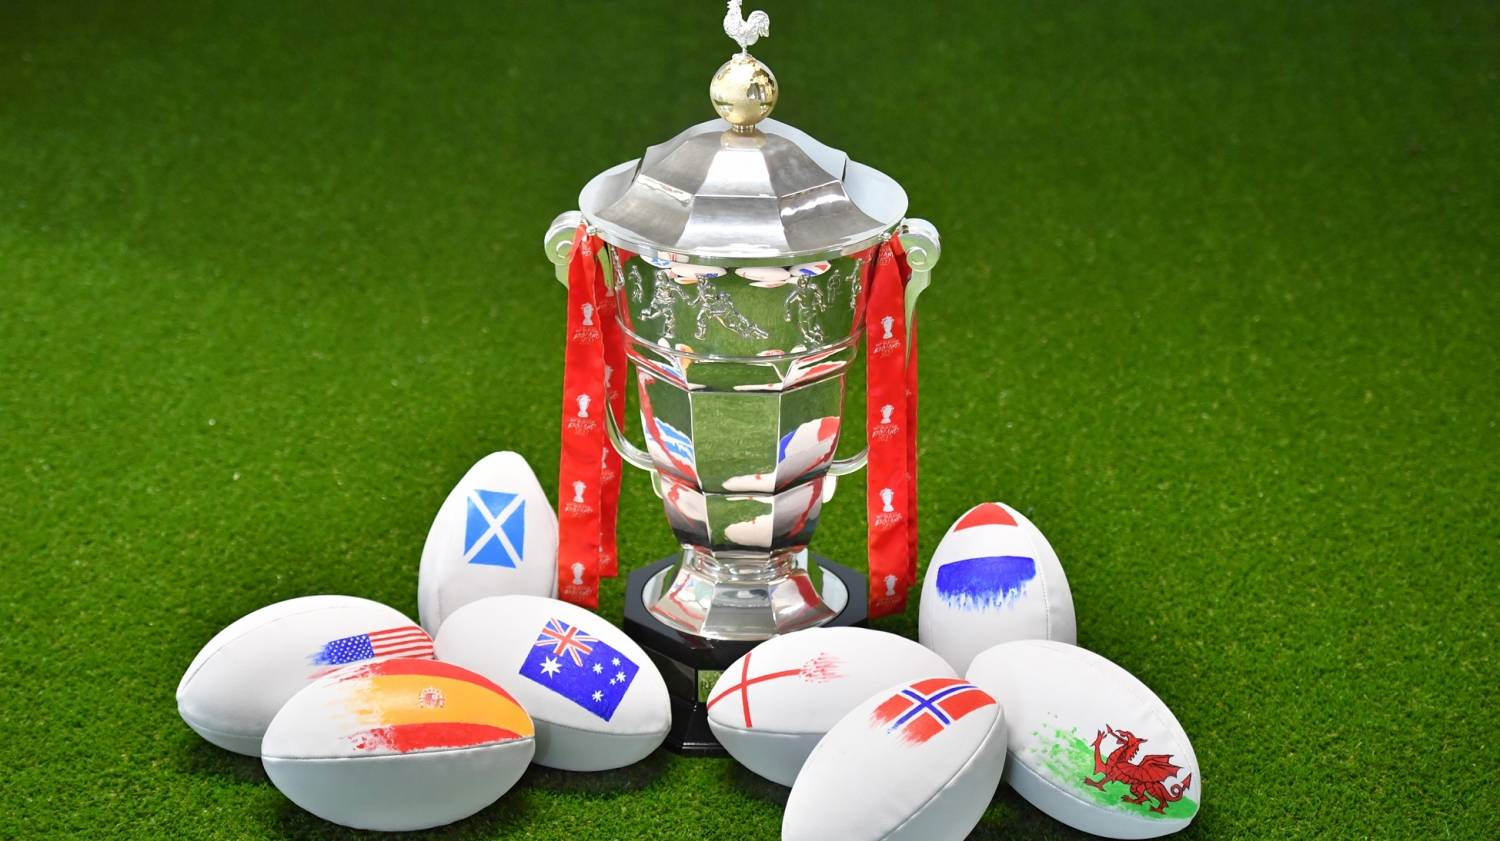 RFL releases statement following World Cup announcement